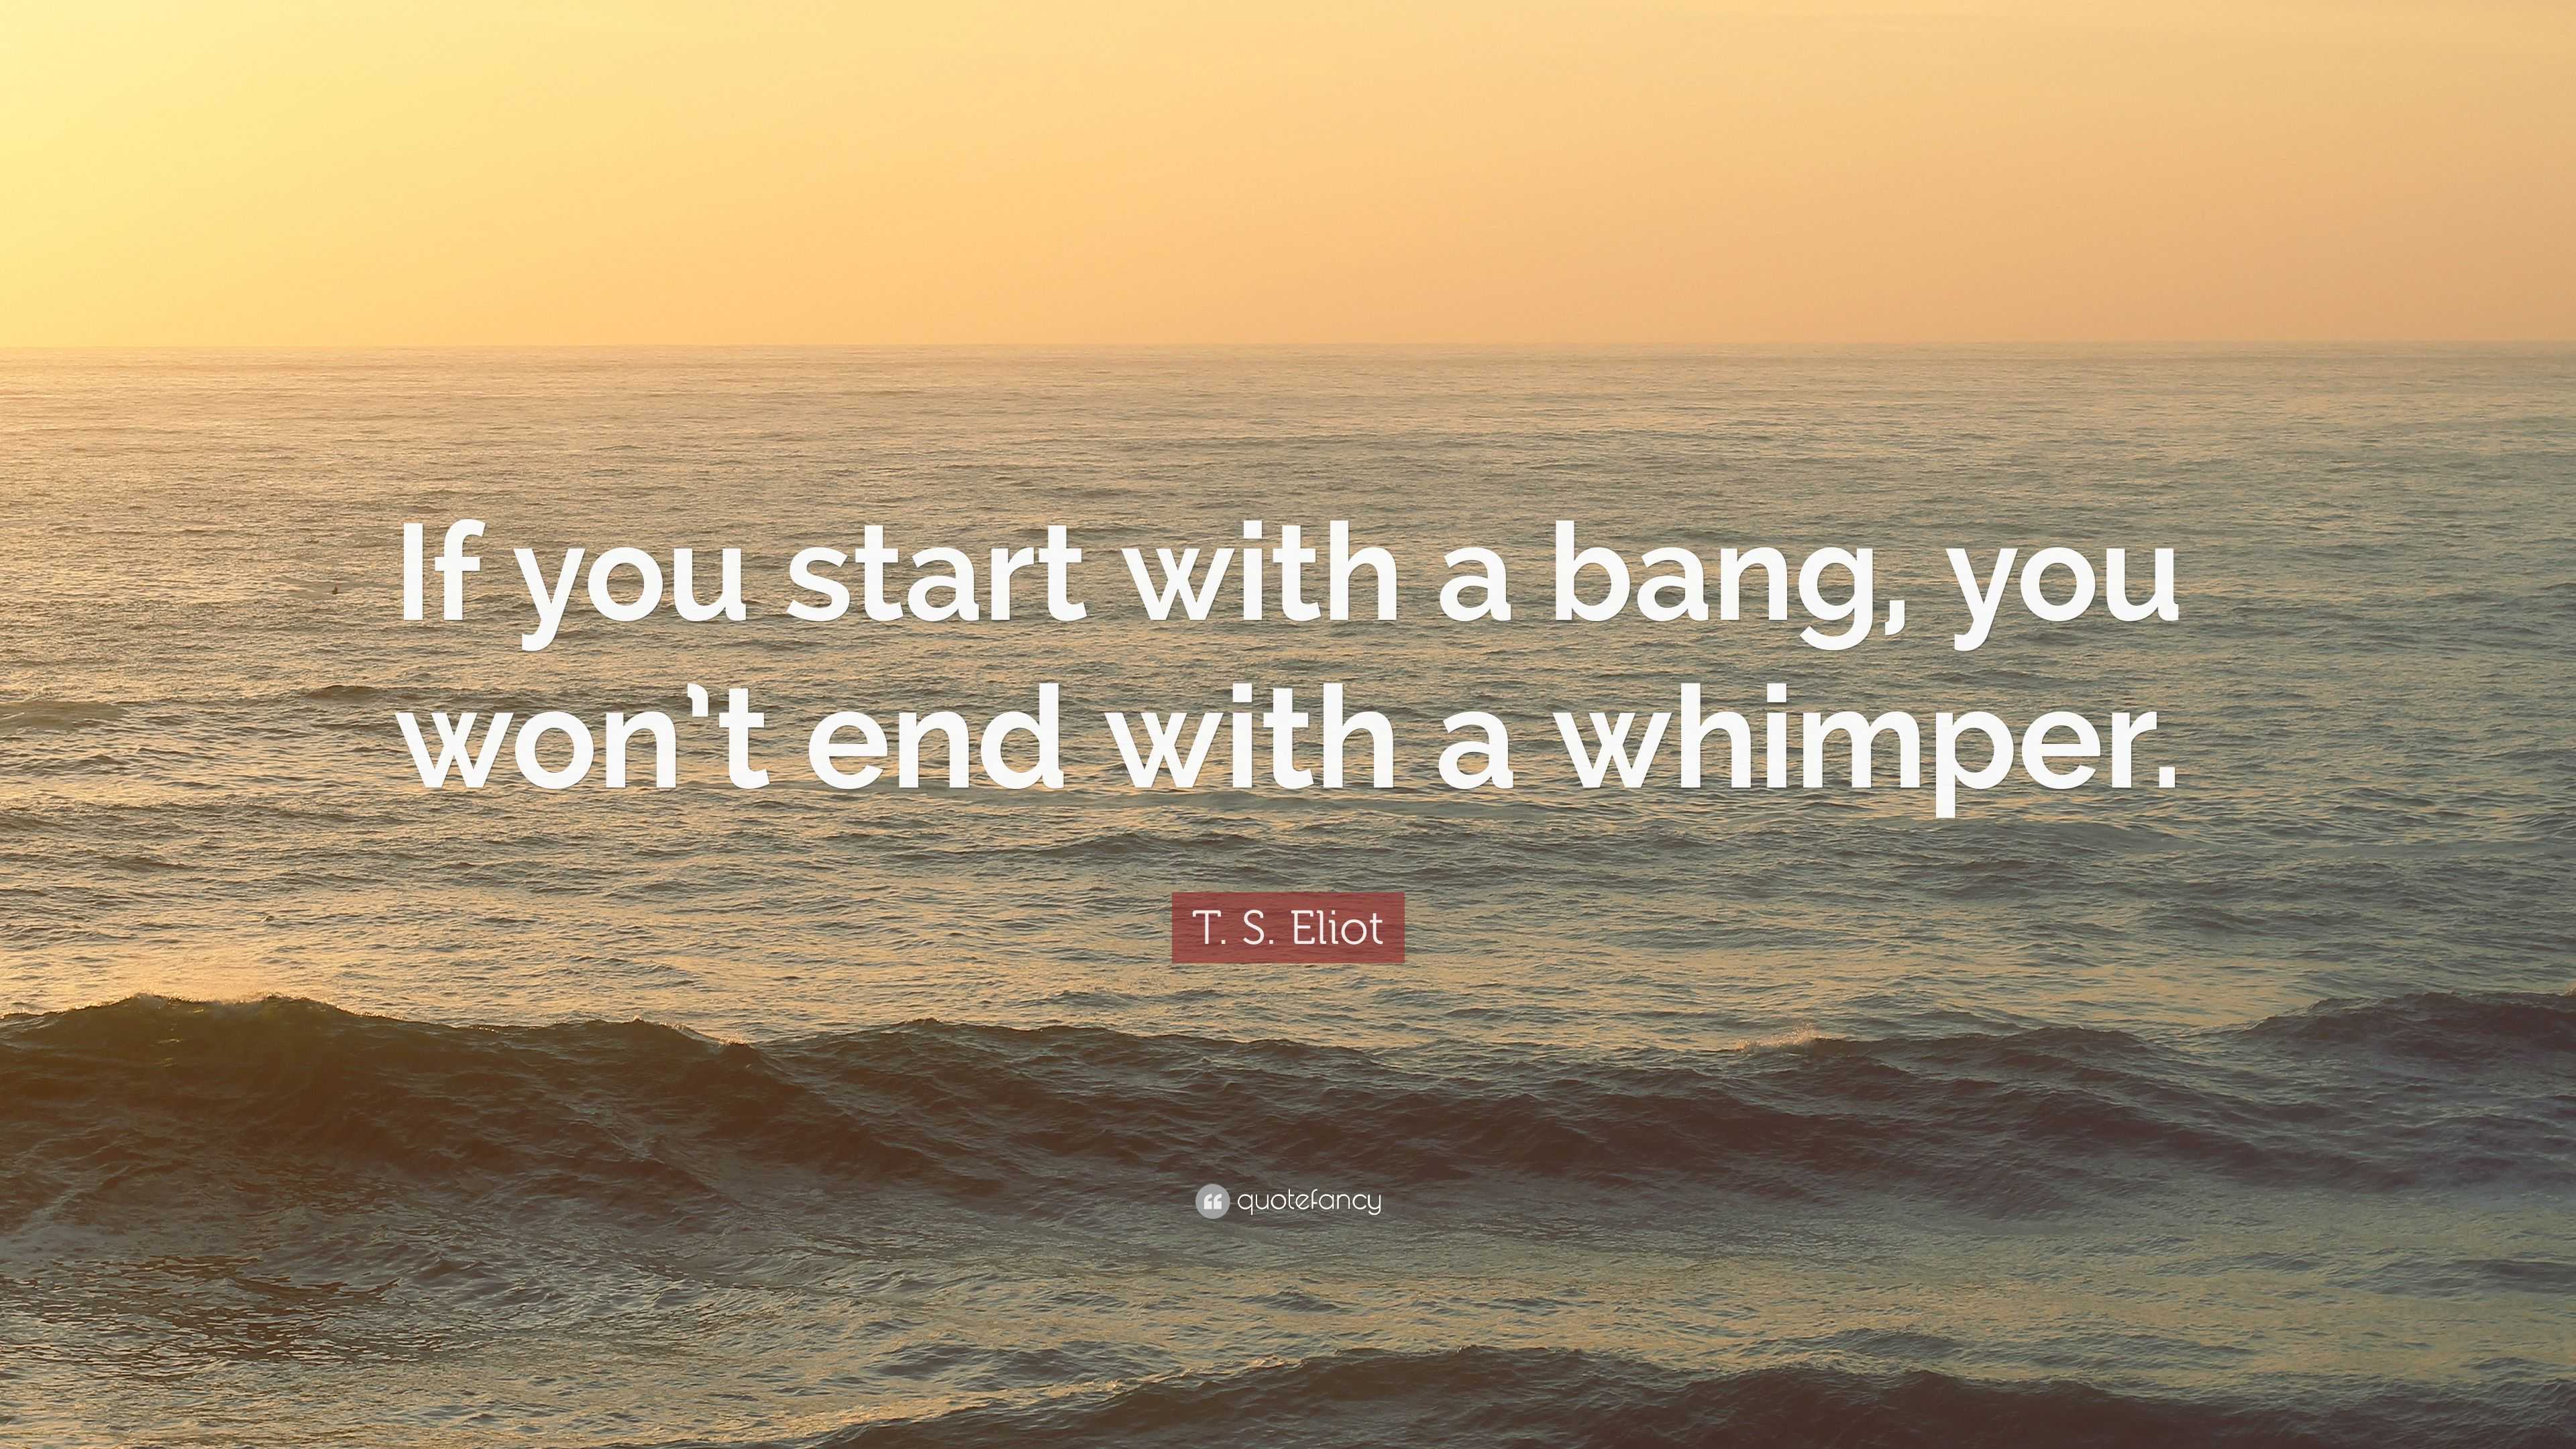 T S Eliot Quote “if You Start With A Bang You Wont End With A Whimper” 6939